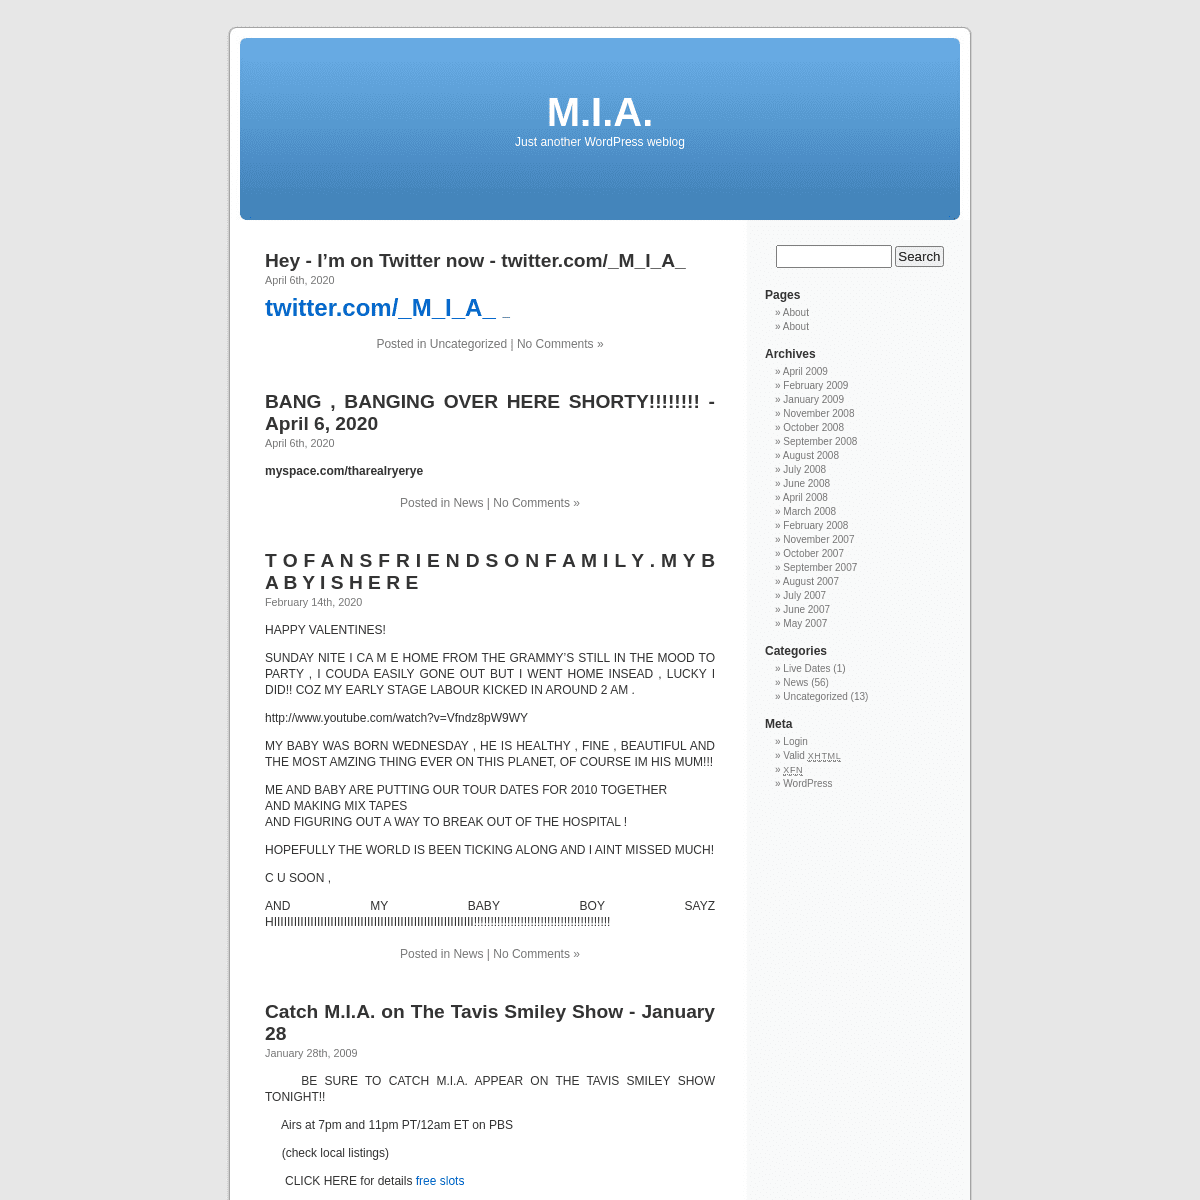 A complete backup of https://miauk.com